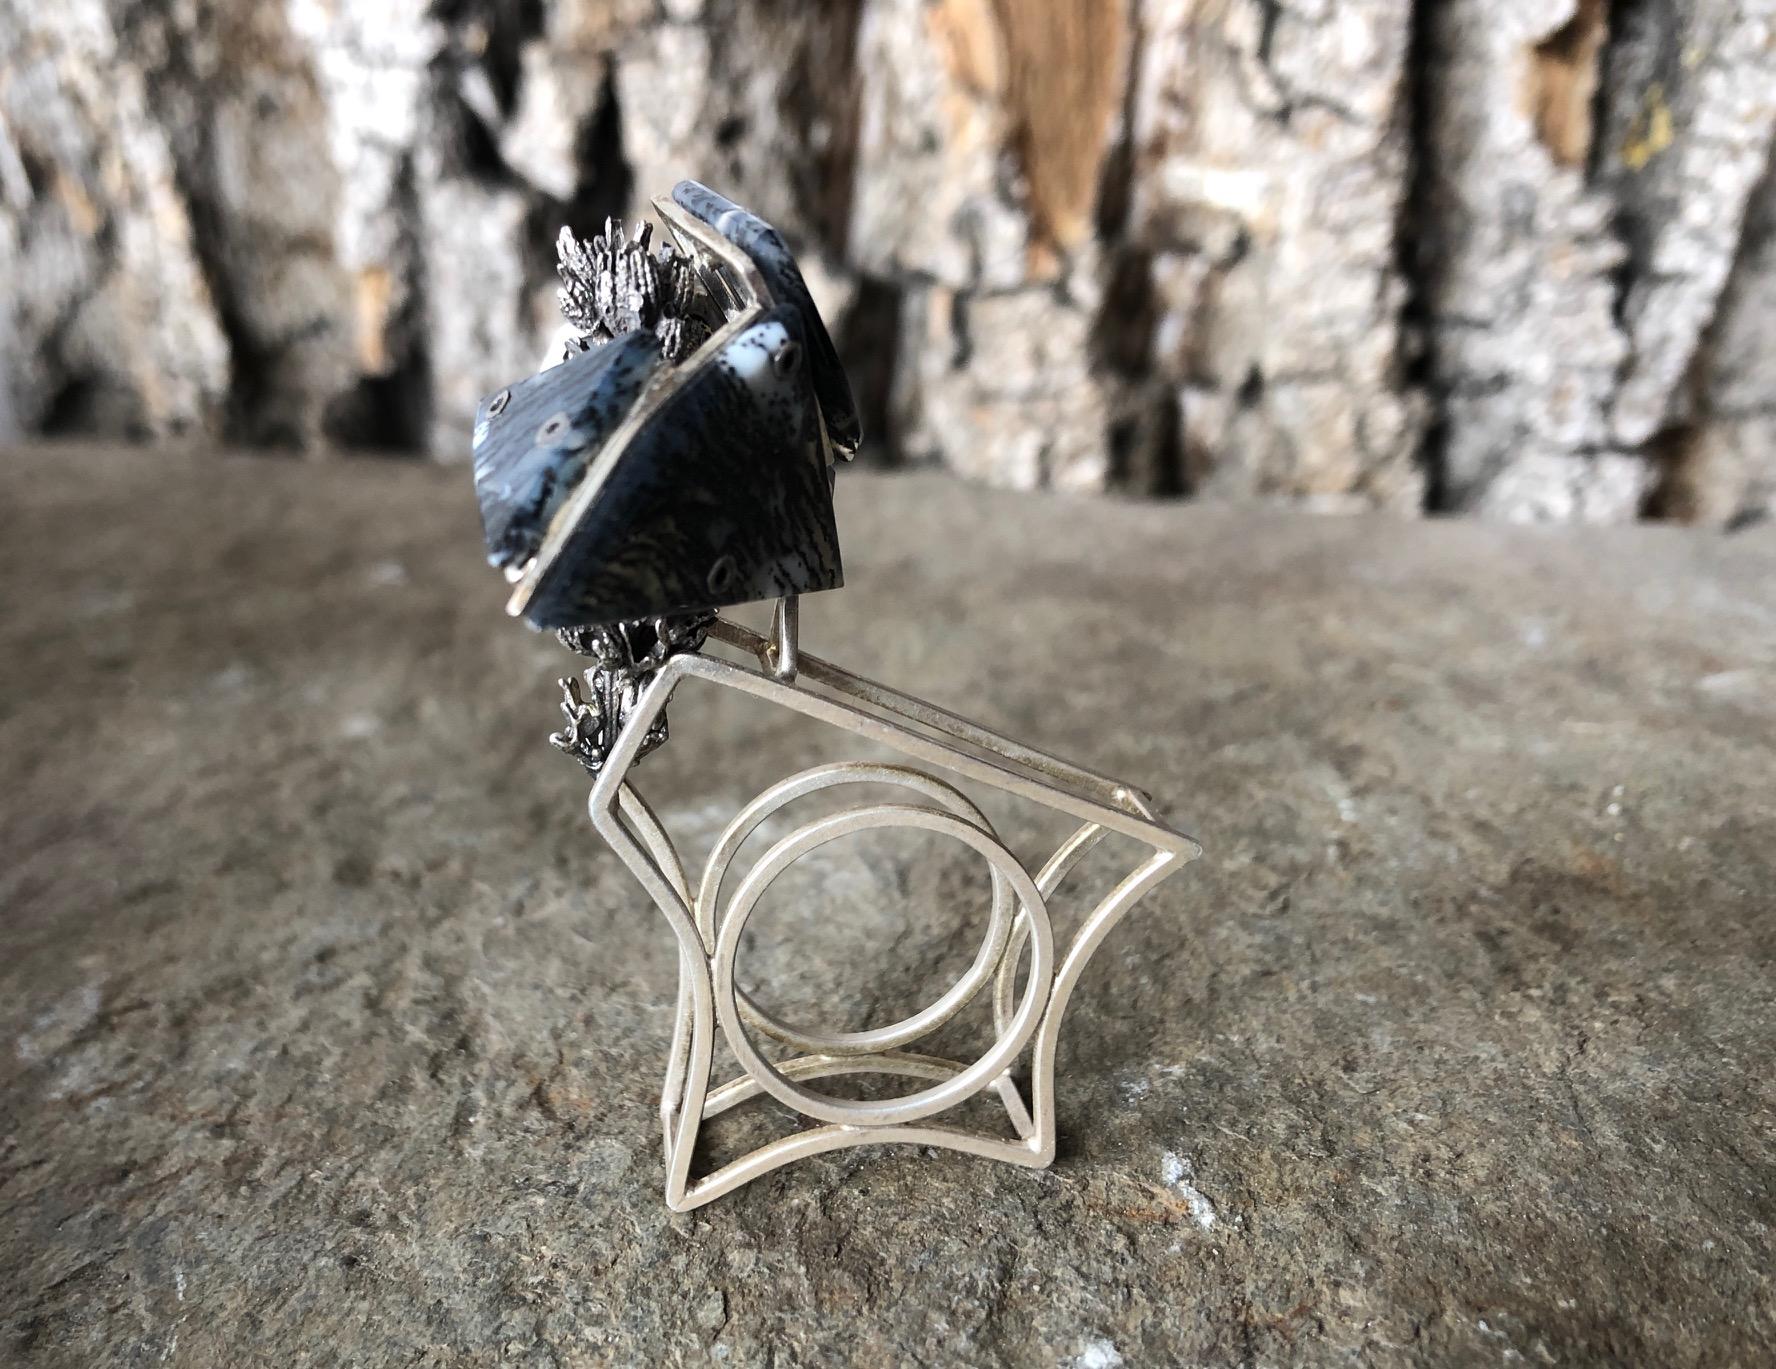 Continuance Ring 3 is a one-of-a kind wearable art piece by Alexandra Forsythe and part of the Instantiating Time Collection.  A body of work reflecting objects that both embody and symbolize time.  Instantiate means to represent or manifest an